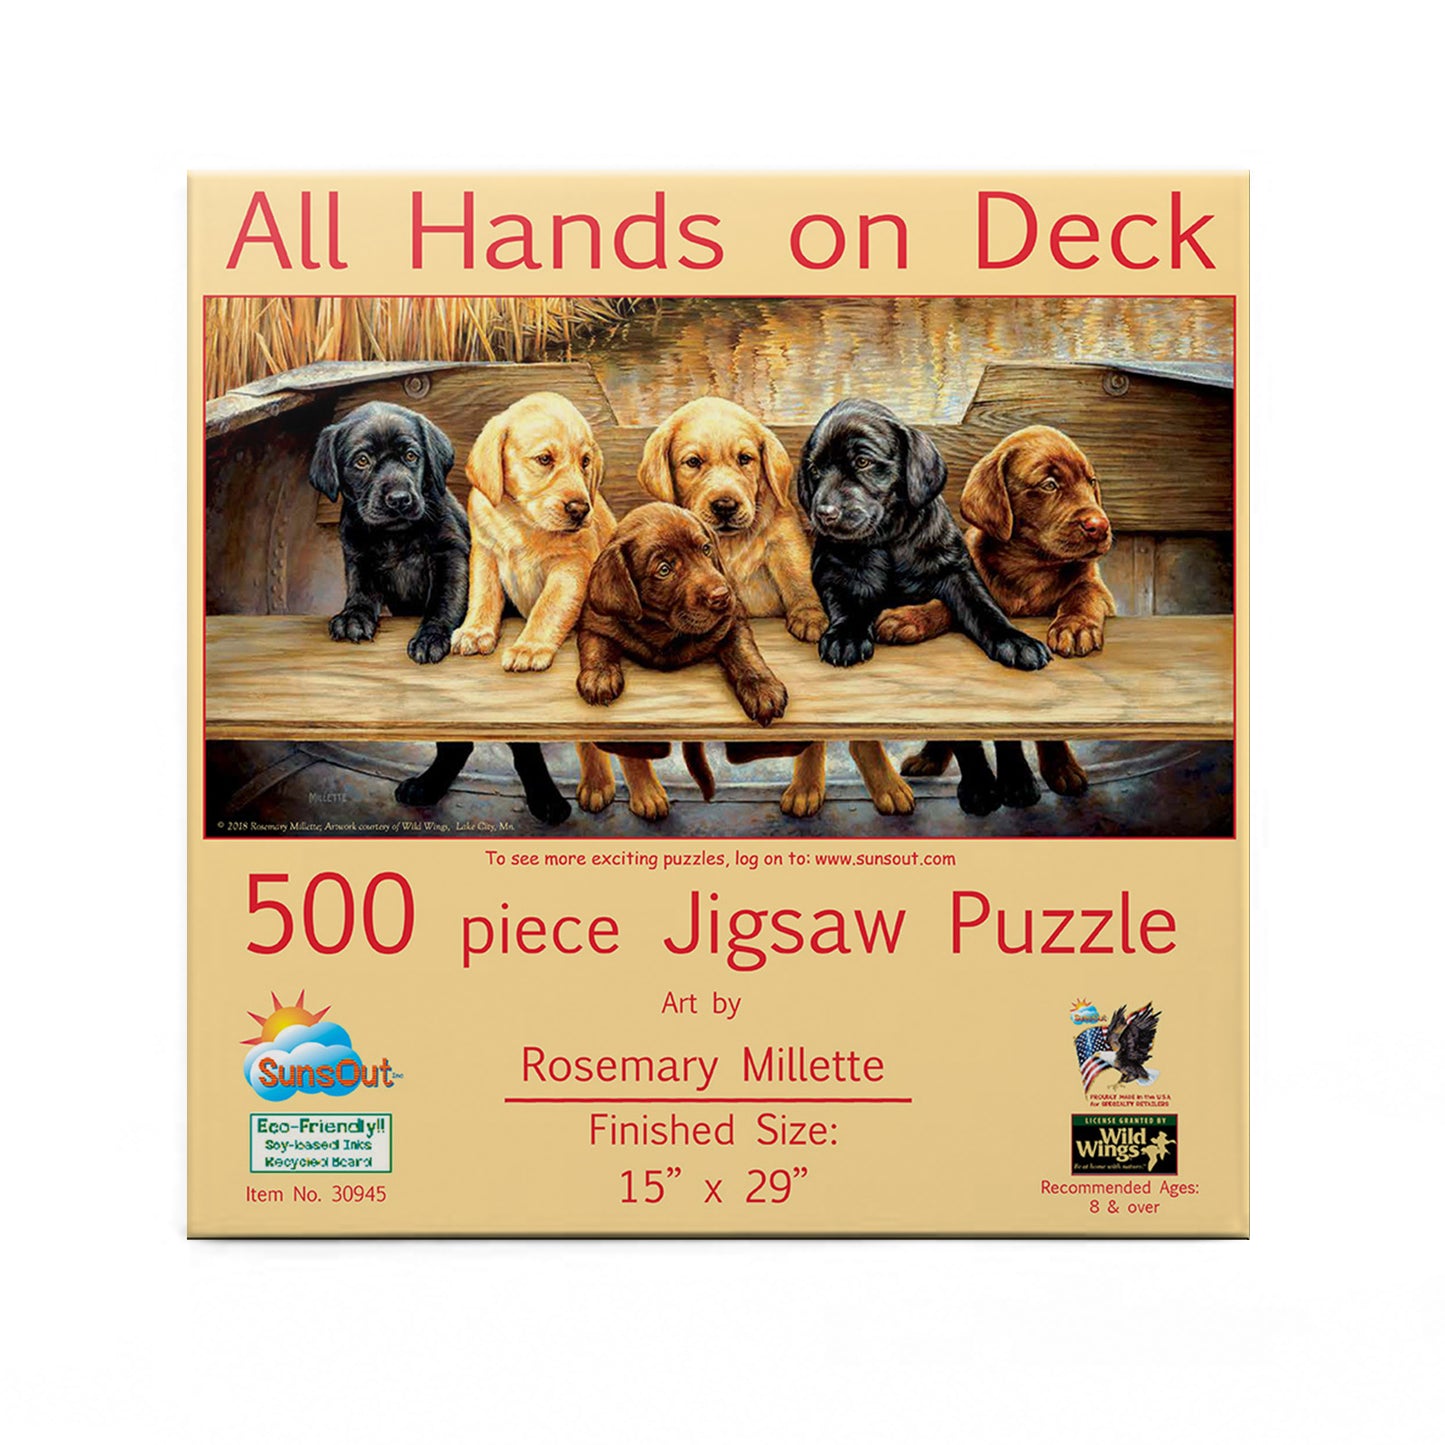 All Hands on Deck - 500 Piece Jigsaw Puzzle